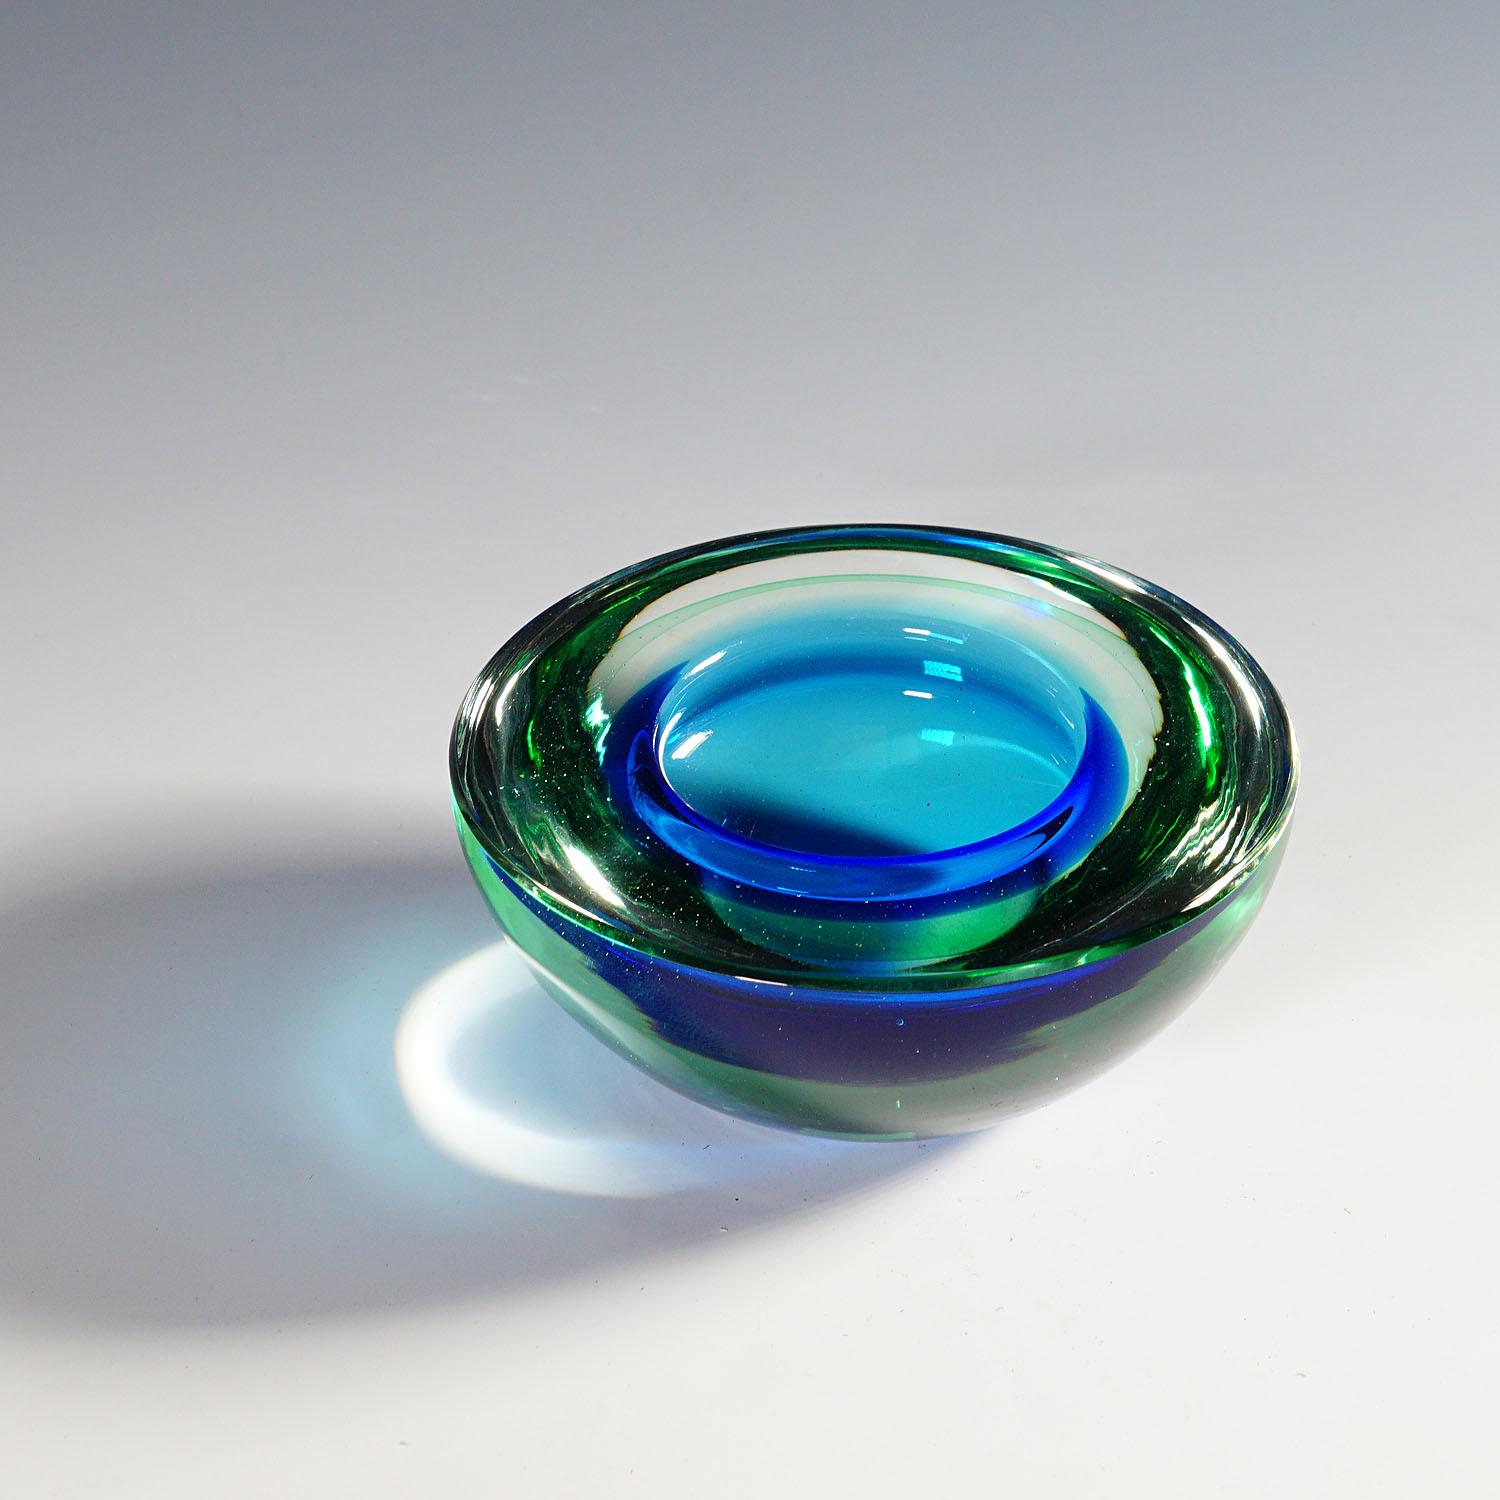 Archimede Seguso Geode bowl in green and blue, Murano Italy ca. 1950s

A heavy Venetian art glass bowl in the shape of a geode designed by Archimede Seguso for Vetreria Artistica Archimede Seguso ca. 1950s. Thick sommerso glass with blue inside, and